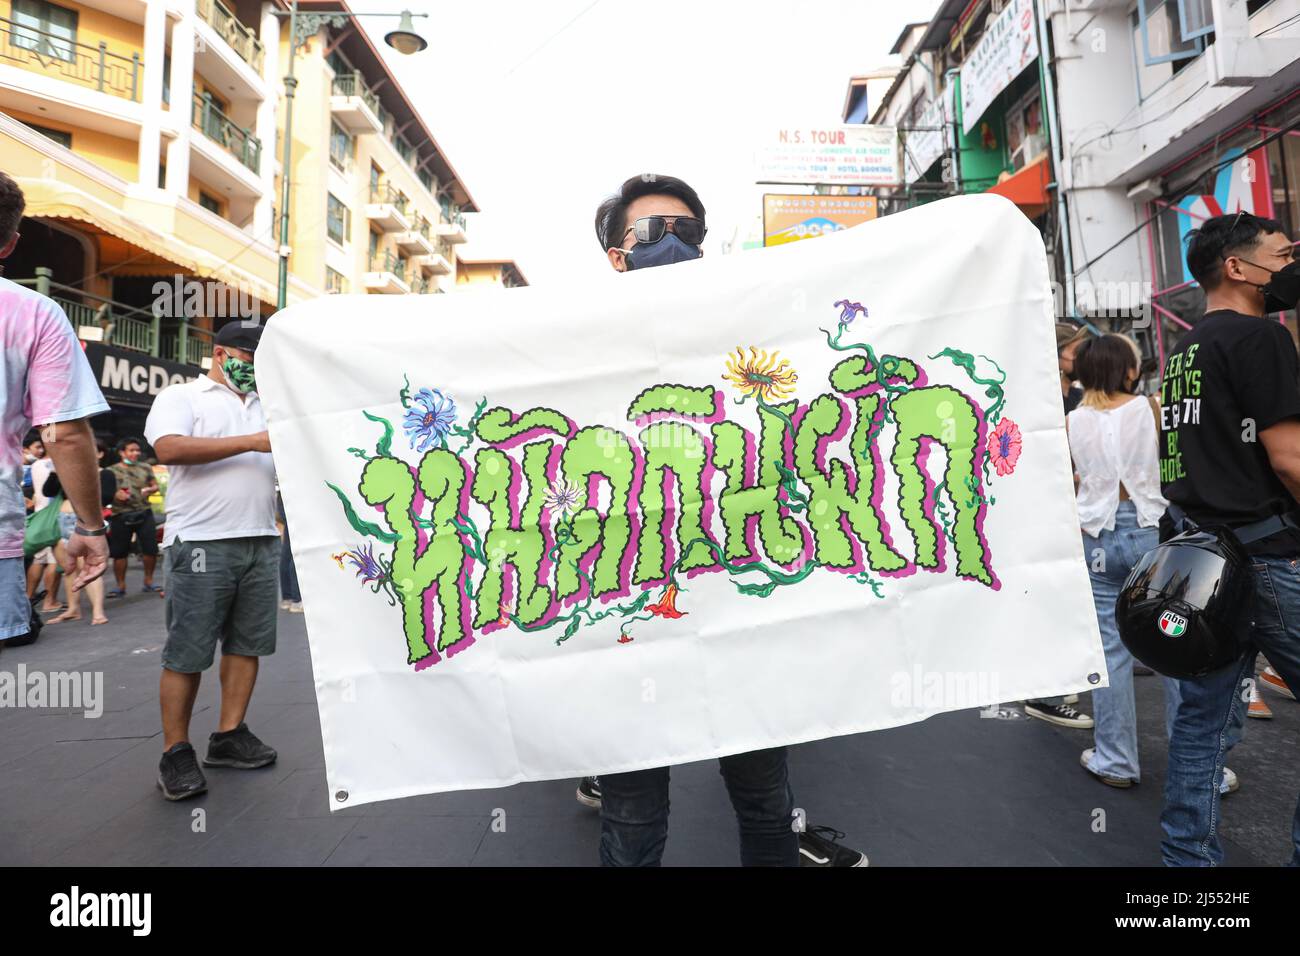 Bangkok, Thailand. 20th Apr, 2022. Protesters for cannabis support groups Rally on 420 World Cannabis Day and call for liberalization of marijuana use and marched from Democracy Monument to Khao San Road to organize World Cannabis Day activities. The Thai text says 'vegetable eater' means marijuana user. (Photo by Adirach Toumlamoon/Pacific Press) Credit: Pacific Press Media Production Corp./Alamy Live News Stock Photo